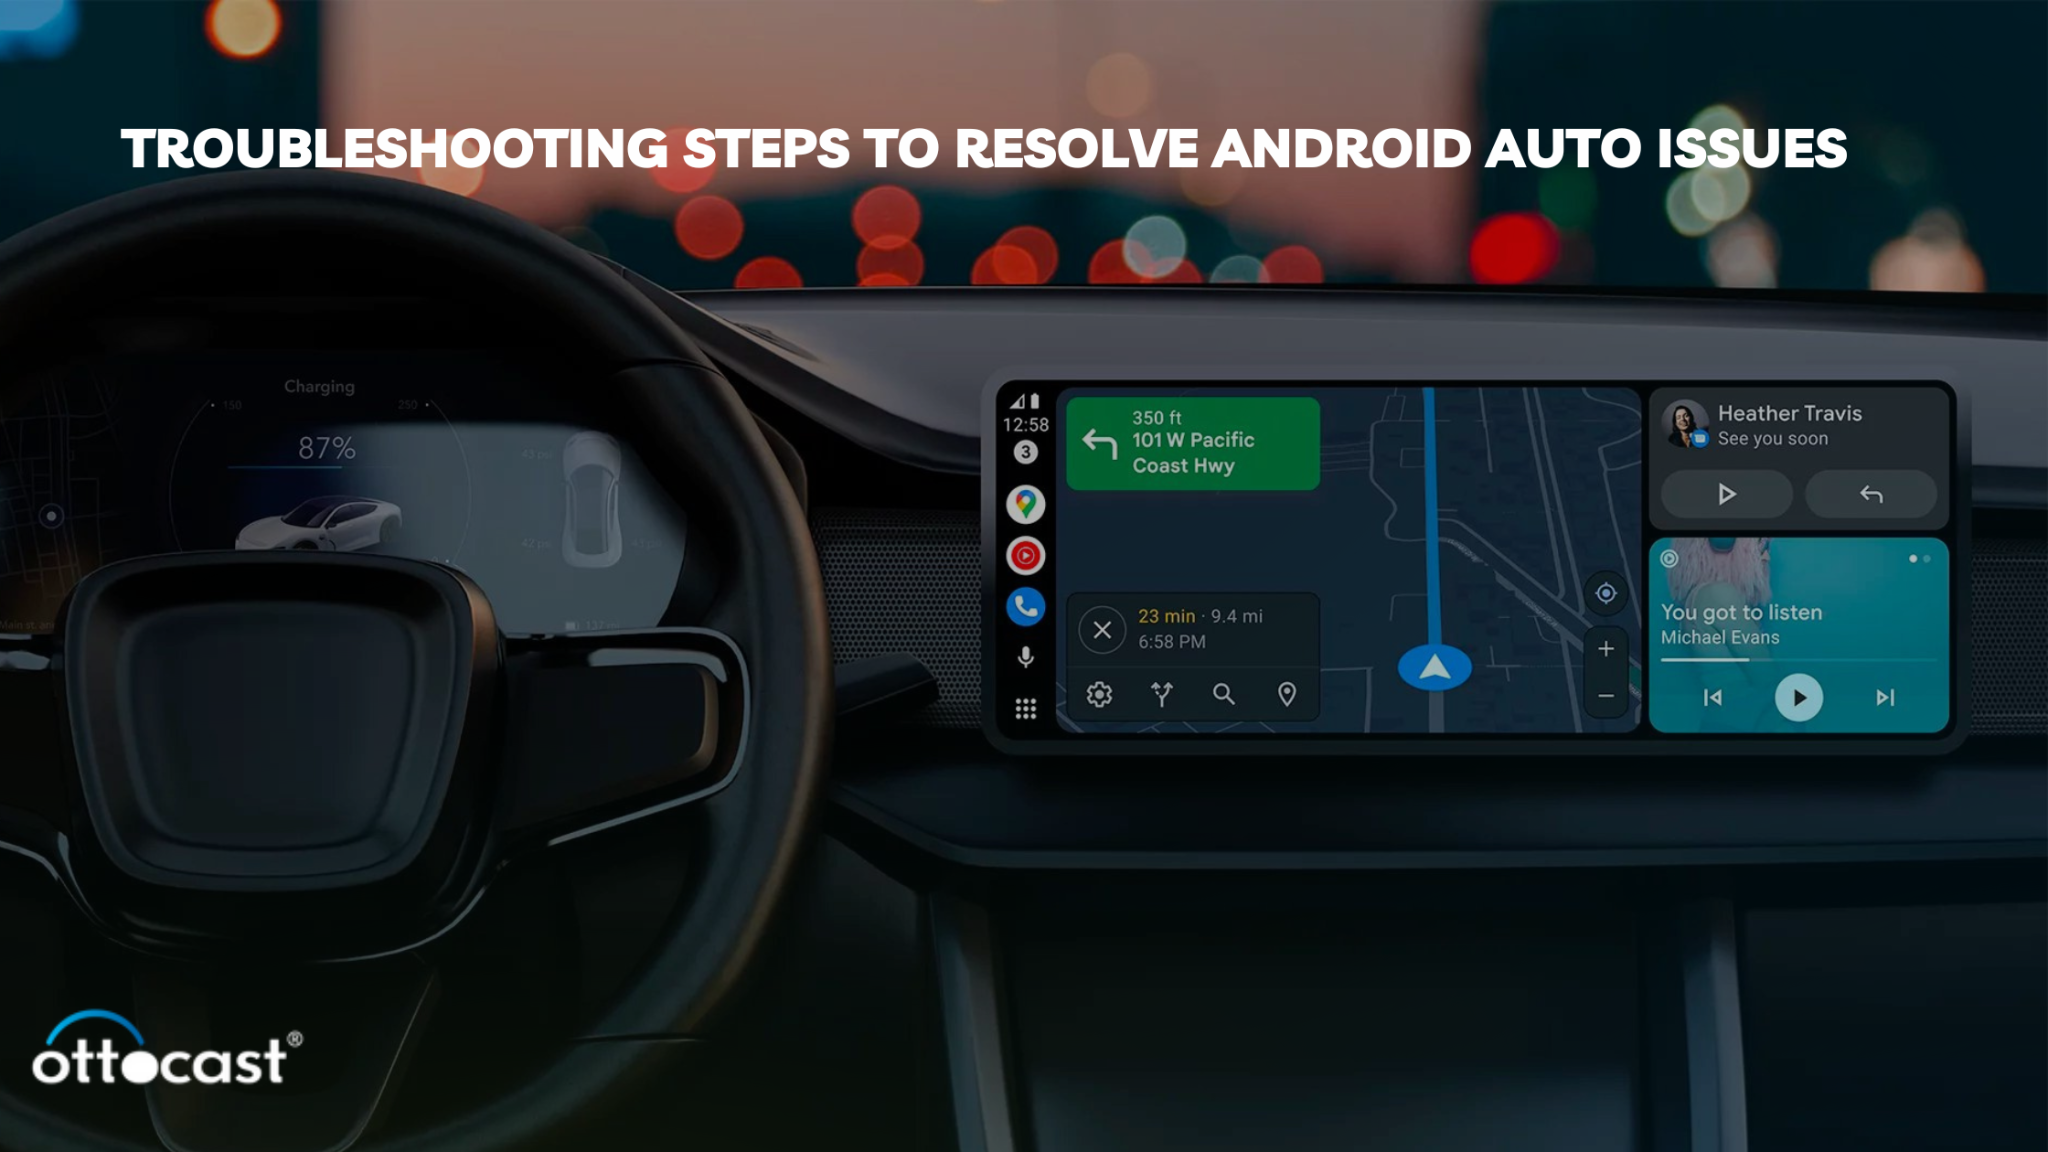 Android Auto Stopped Working: Causes, Troubleshooting, and Solutions f –  OTTOCAST